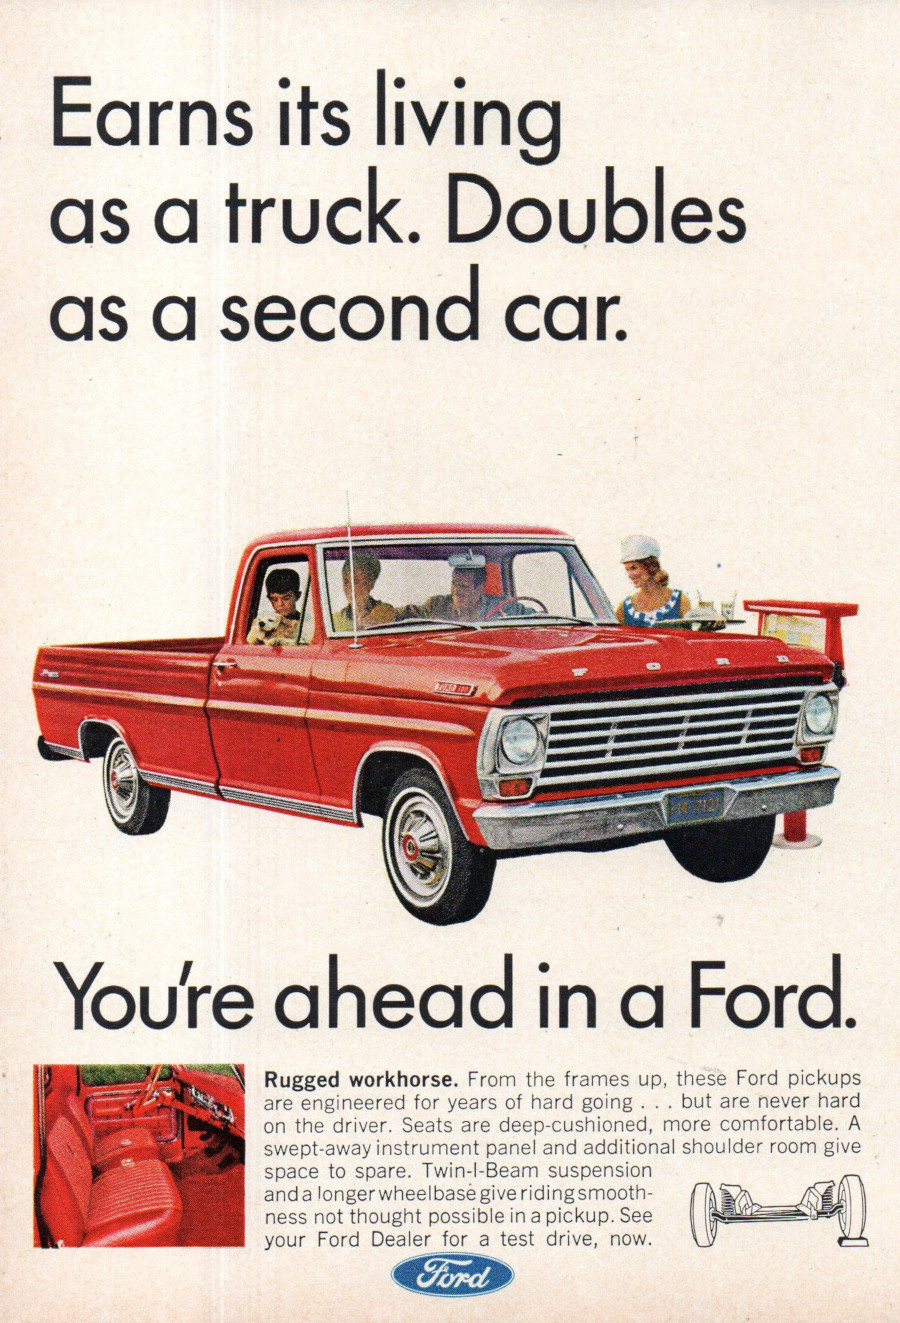 1967 Ford pickup ad Ford Motor Company Archives RESIZED 6